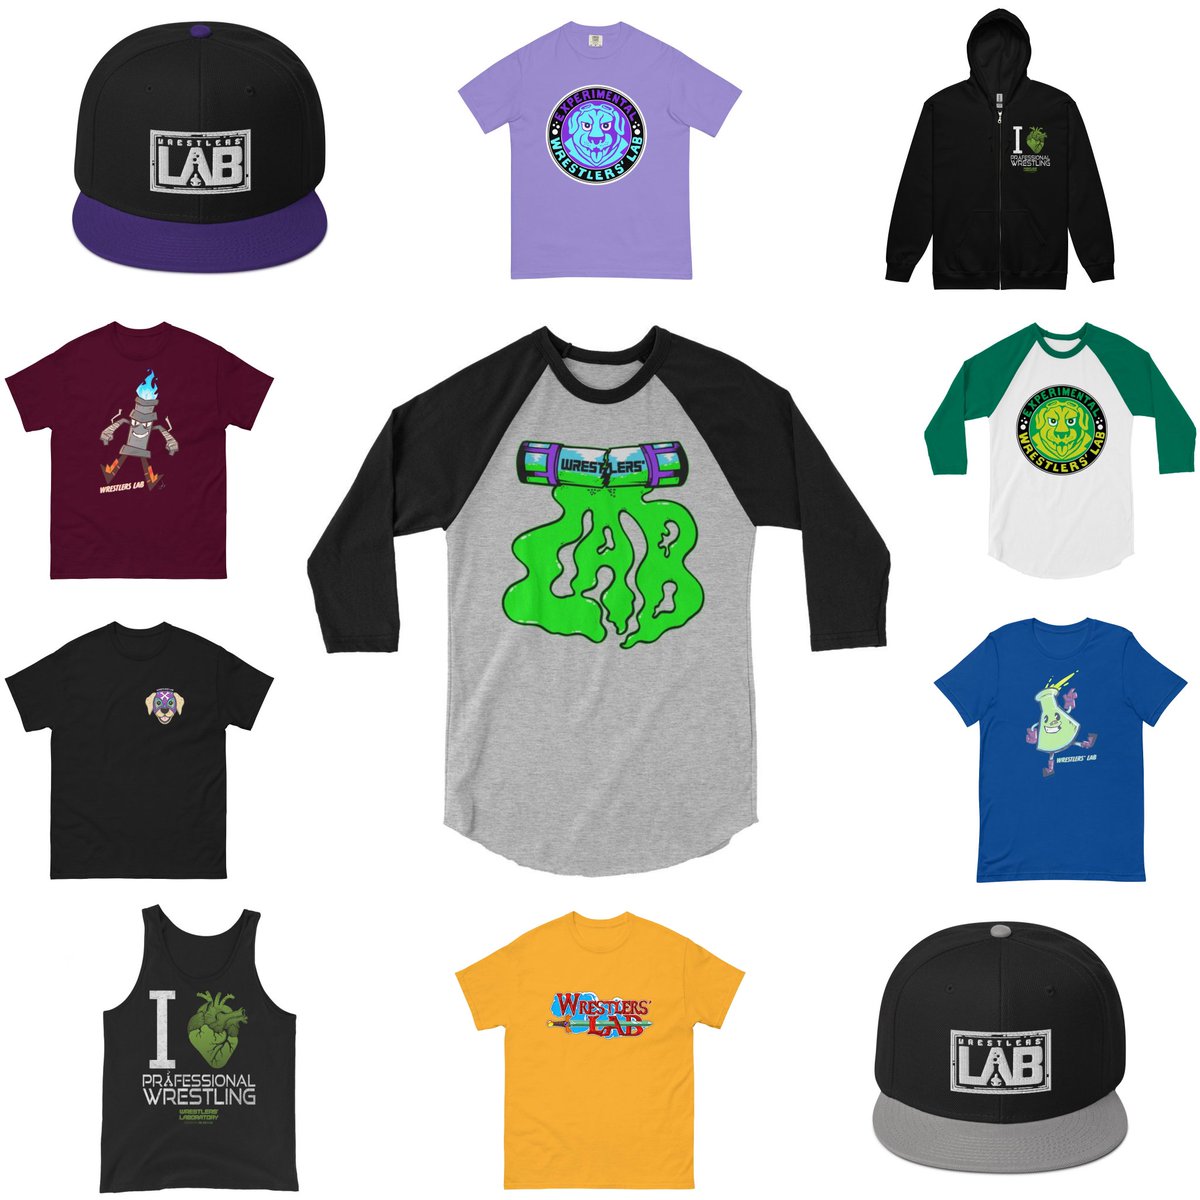 Another great way to support The Lab is through our @BrainbusterTees store! There are so many designs and variations to choose from! 🖱 brainbustertees.com/promotions/wre…